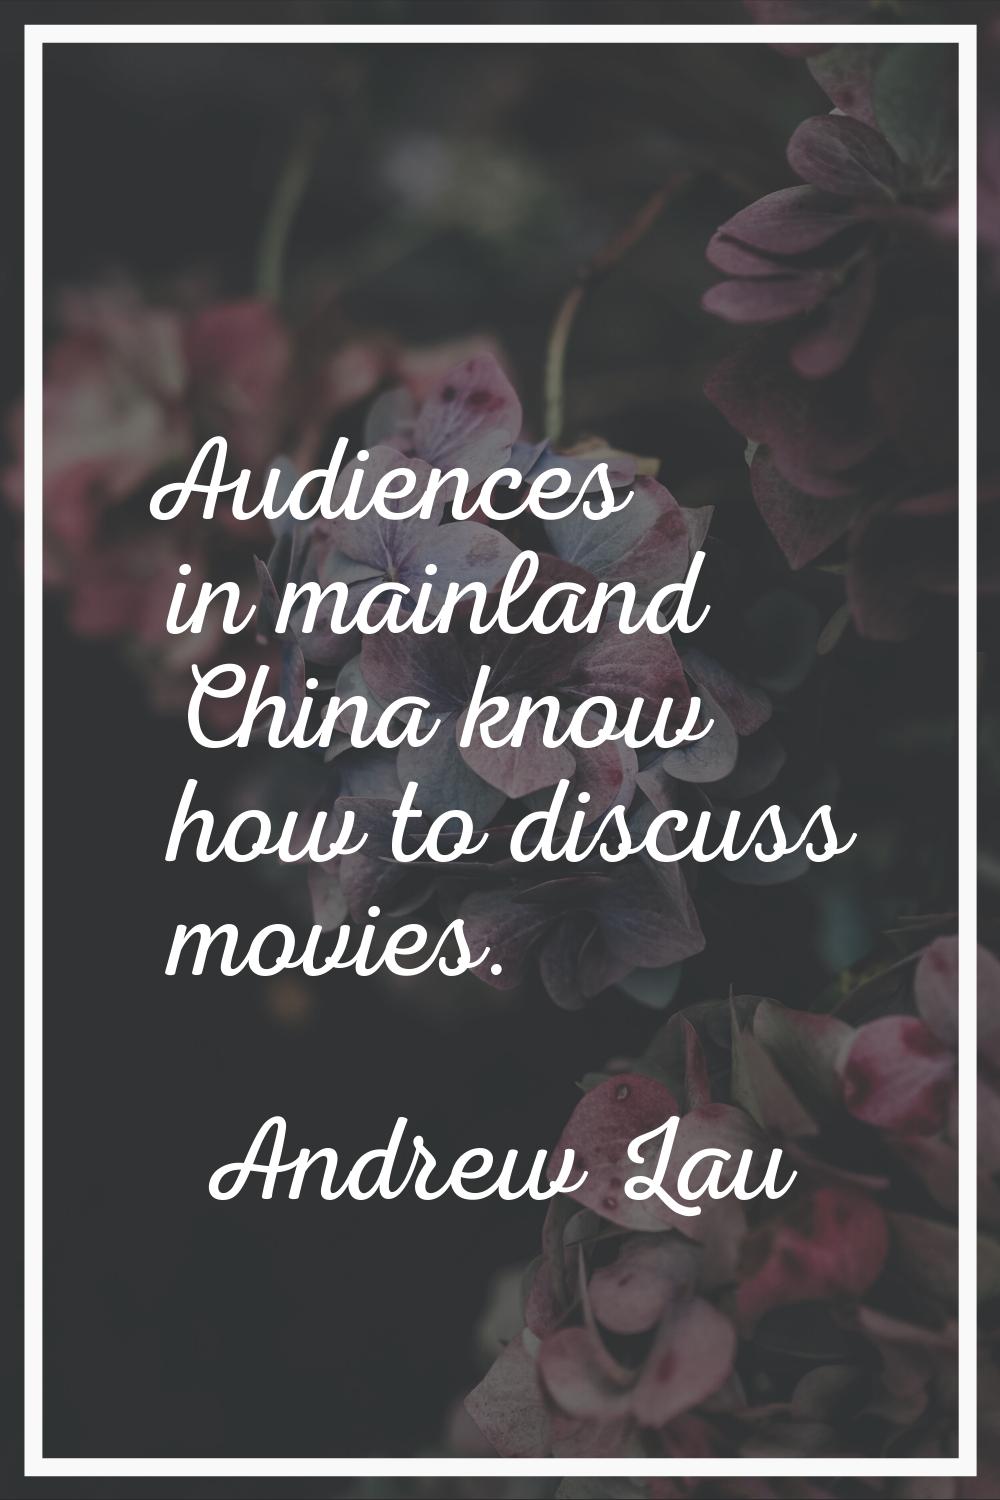 Audiences in mainland China know how to discuss movies.